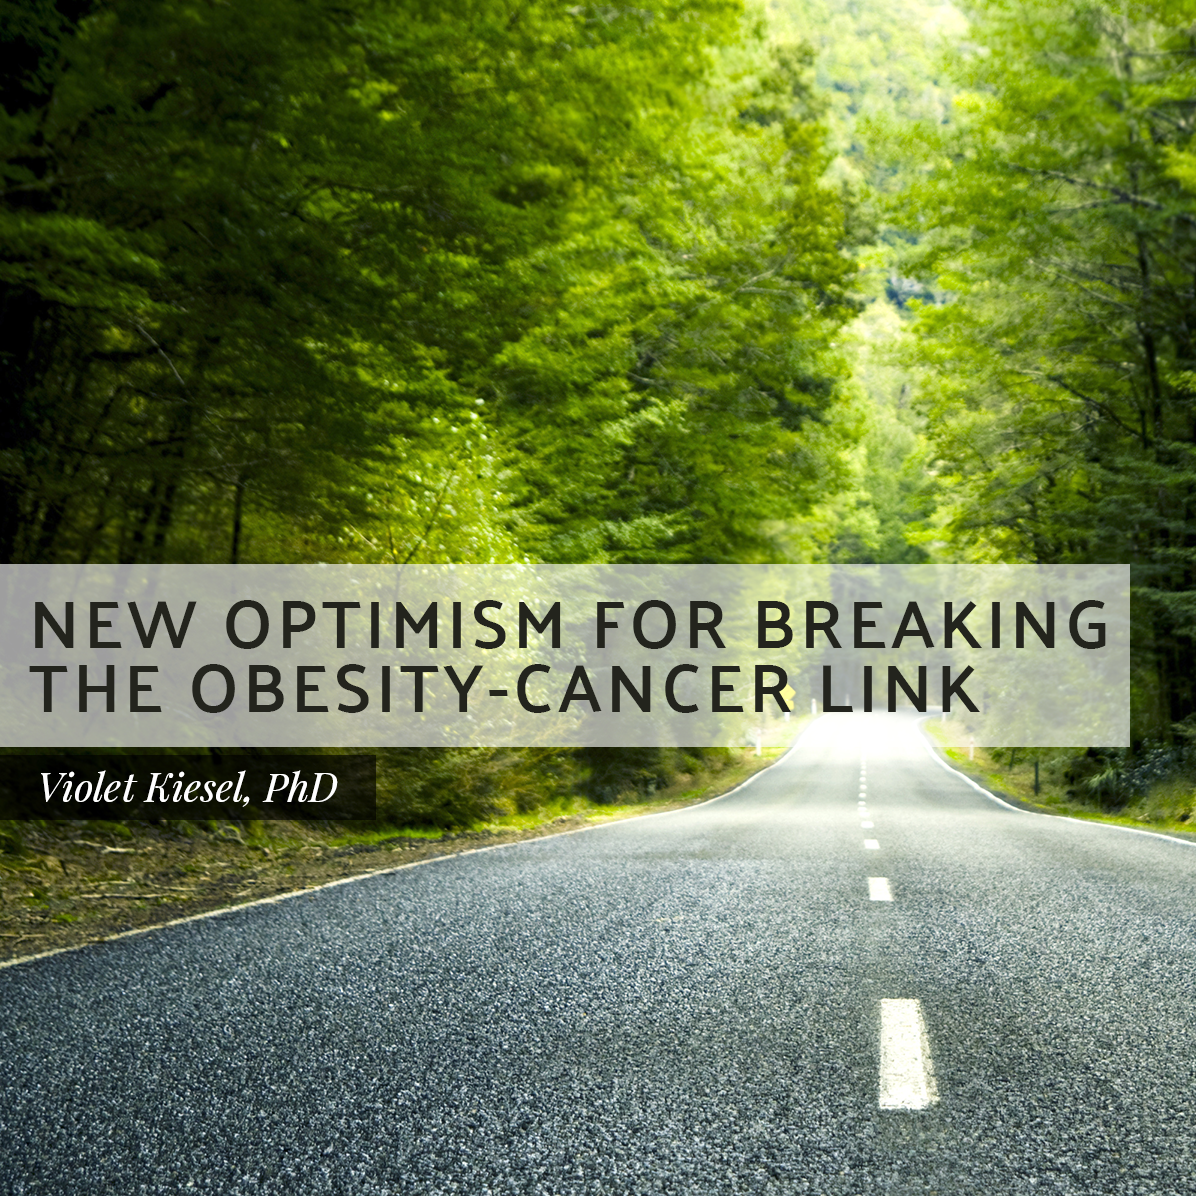 New Optimism for Breaking the Obesity-Cancer Link